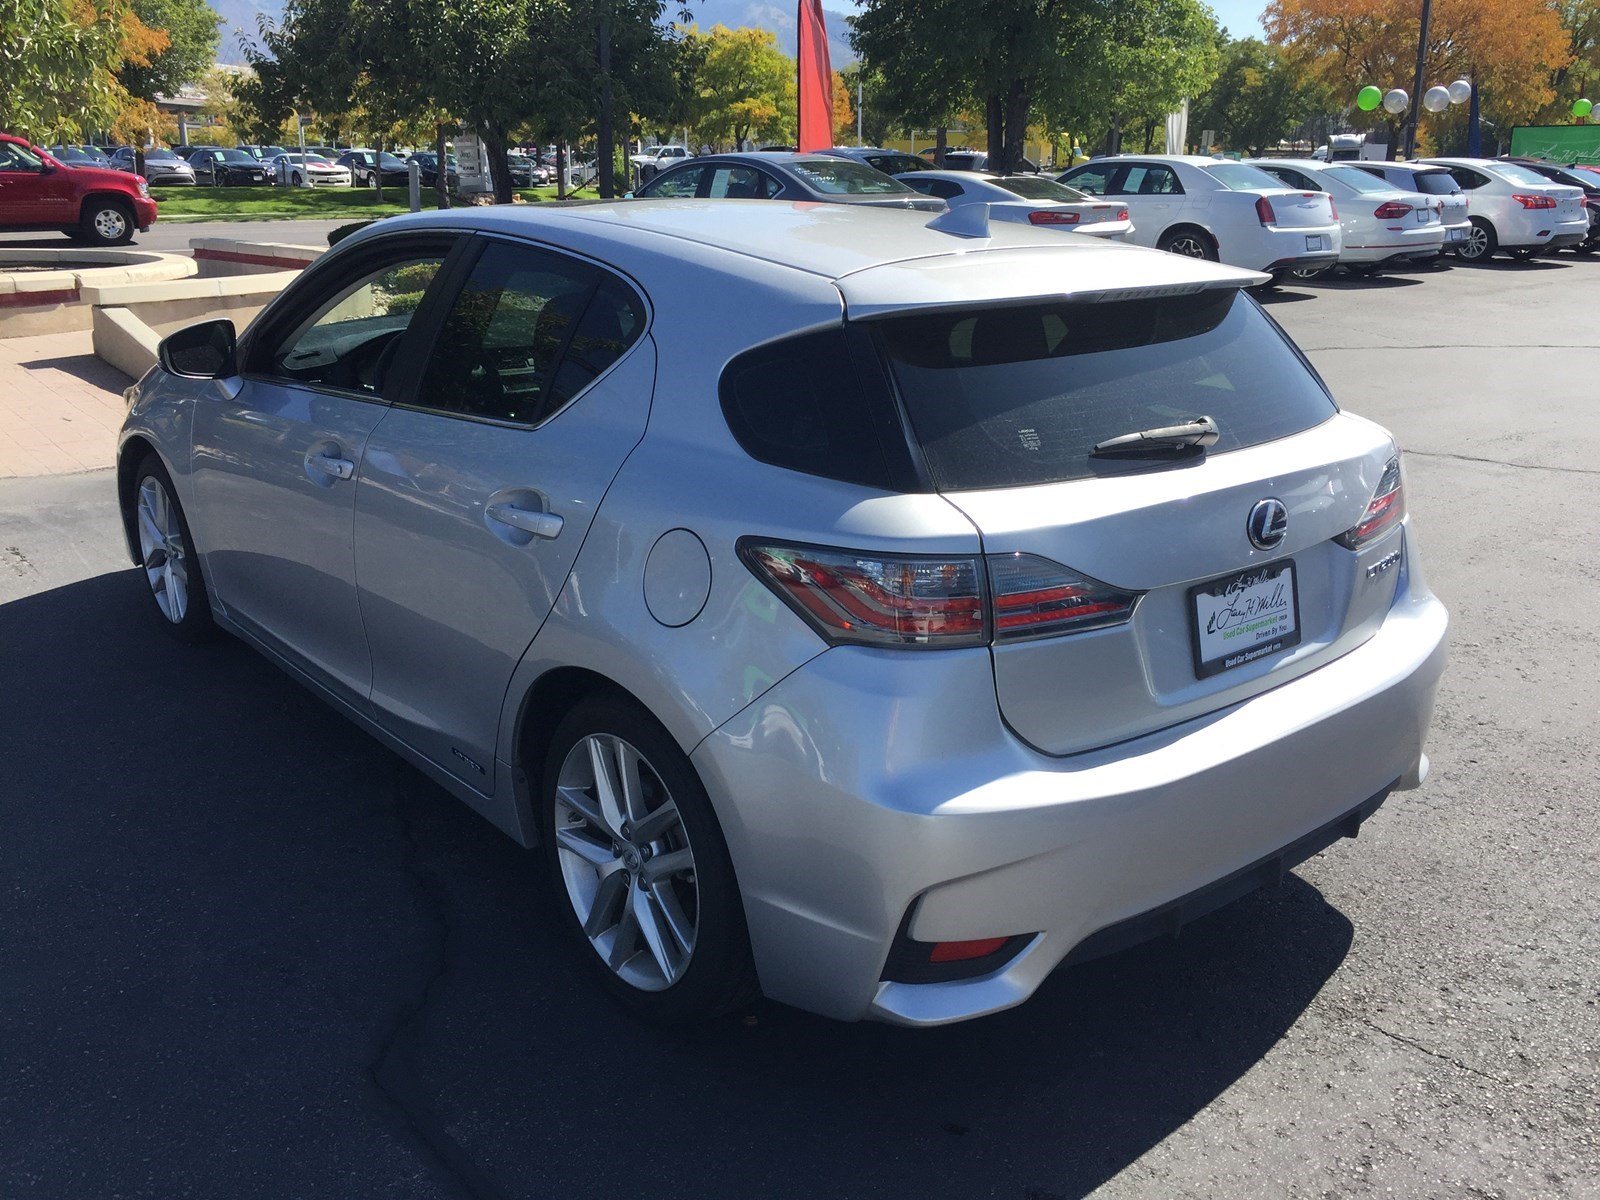 PreOwned 2015 Lexus CT 200h Hybrid Hatchback in Riverdale